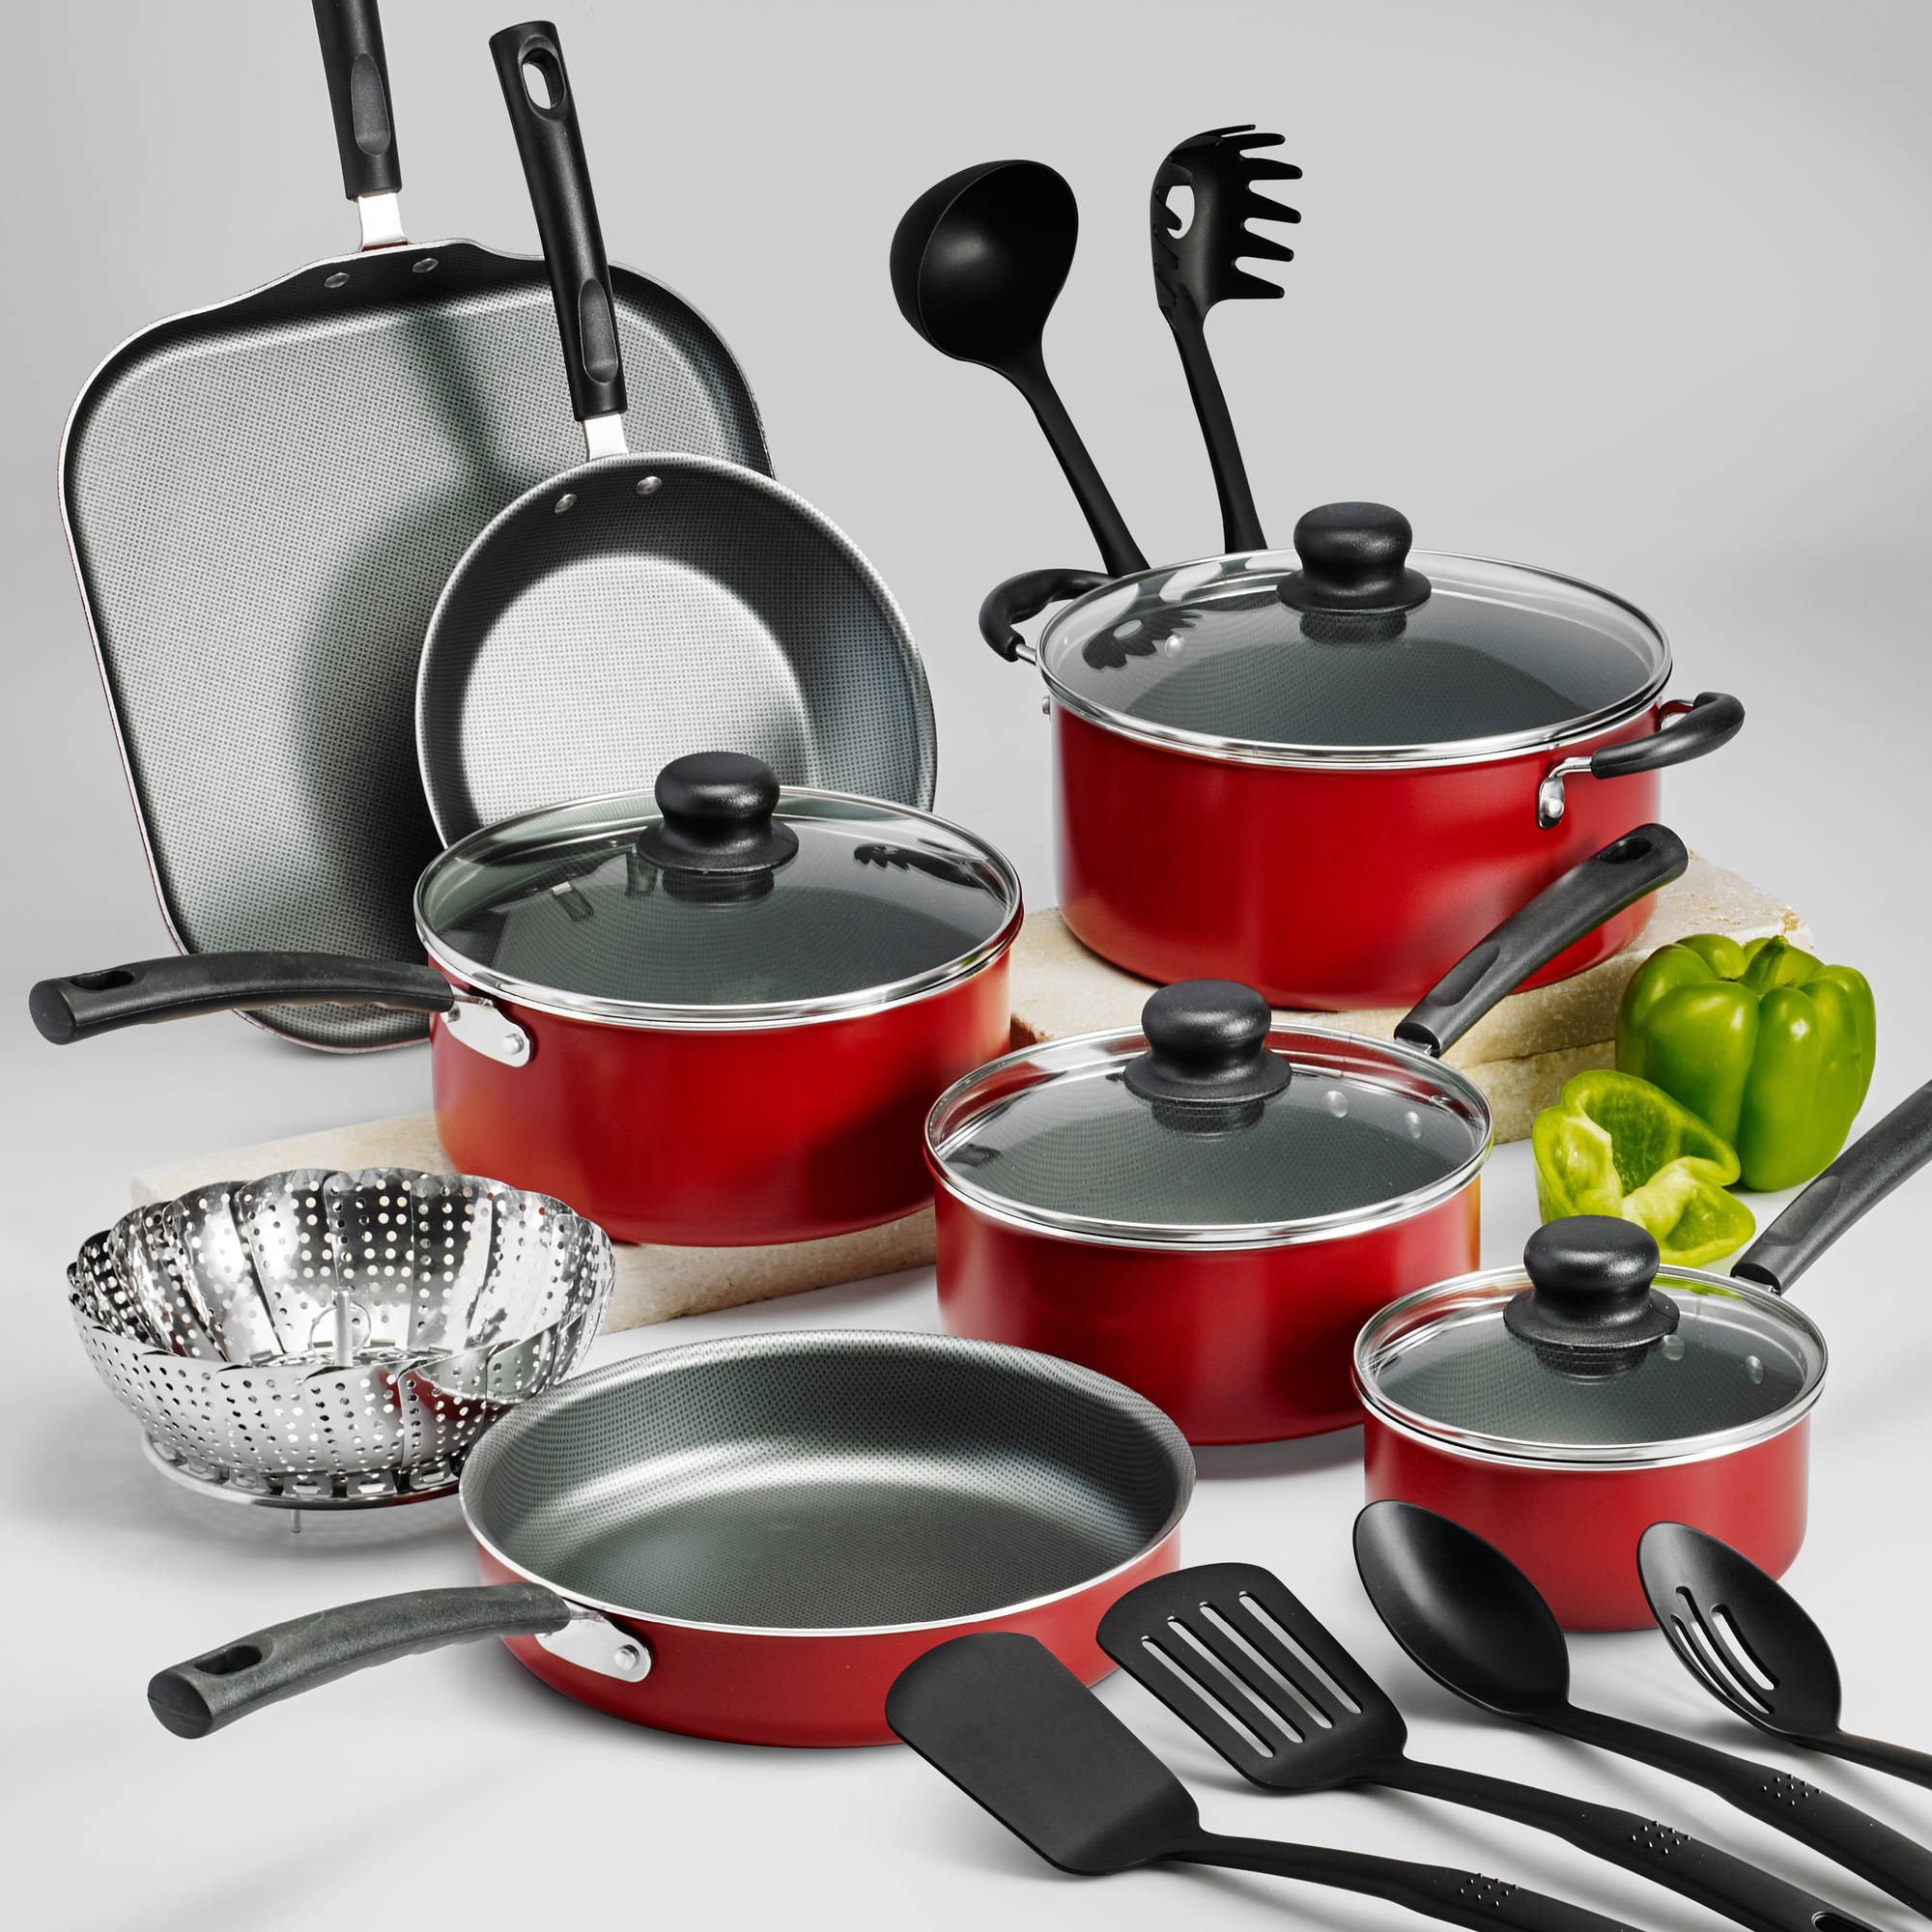 Tramontina Primaware 18 Piece Non-stick Cookware Set, Red $35.96